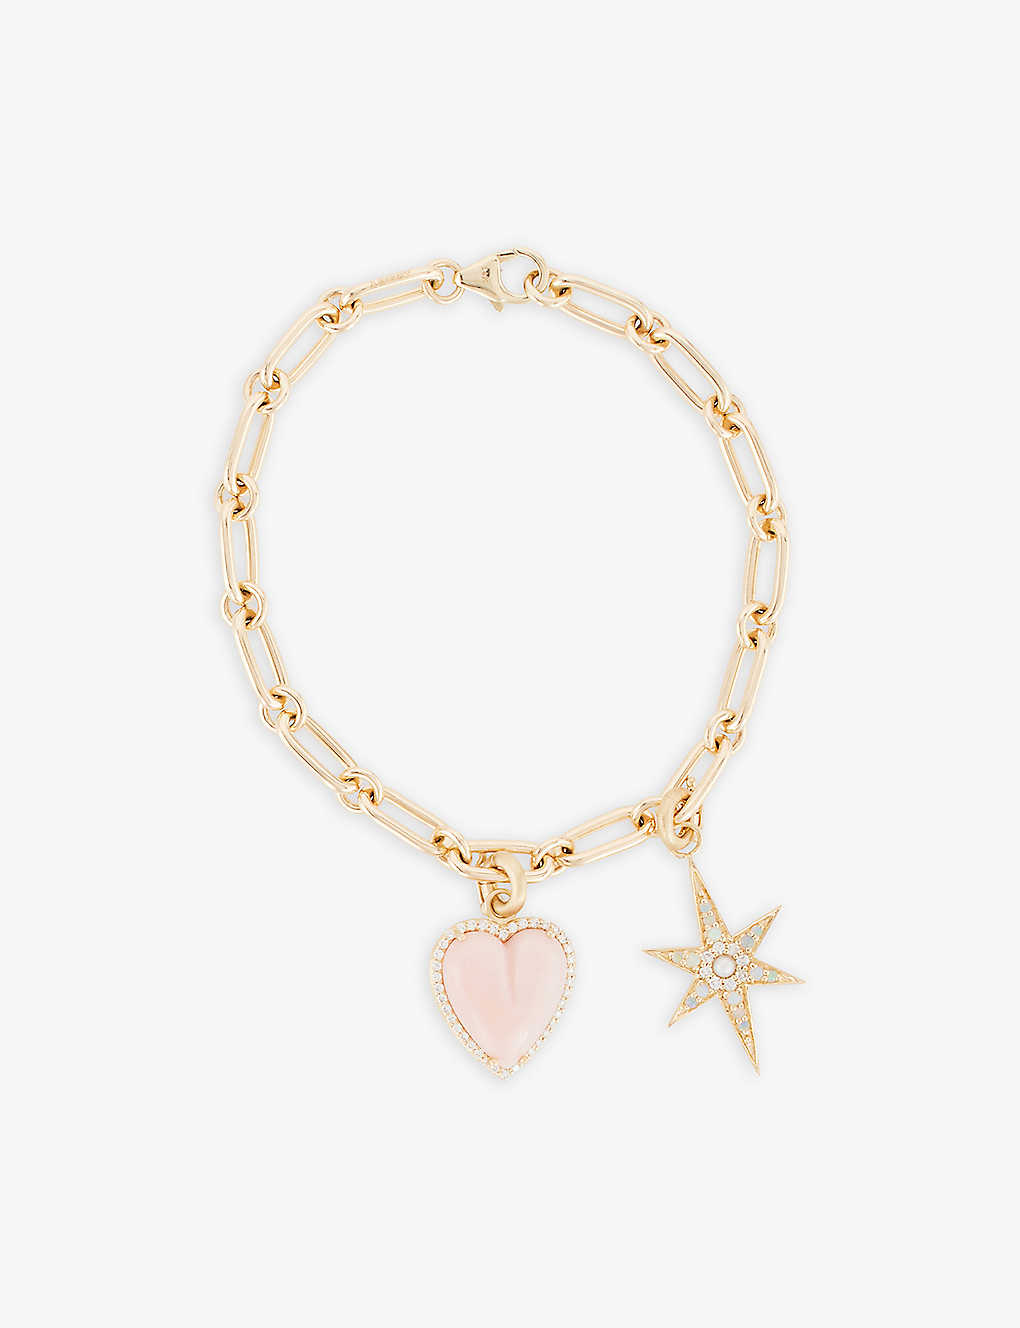 Storrow Heart Star 14ct Yellow-gold, Diamond, Opal, Pink Opal And Pearl Charm Bracelet In 14k Yellow Gold